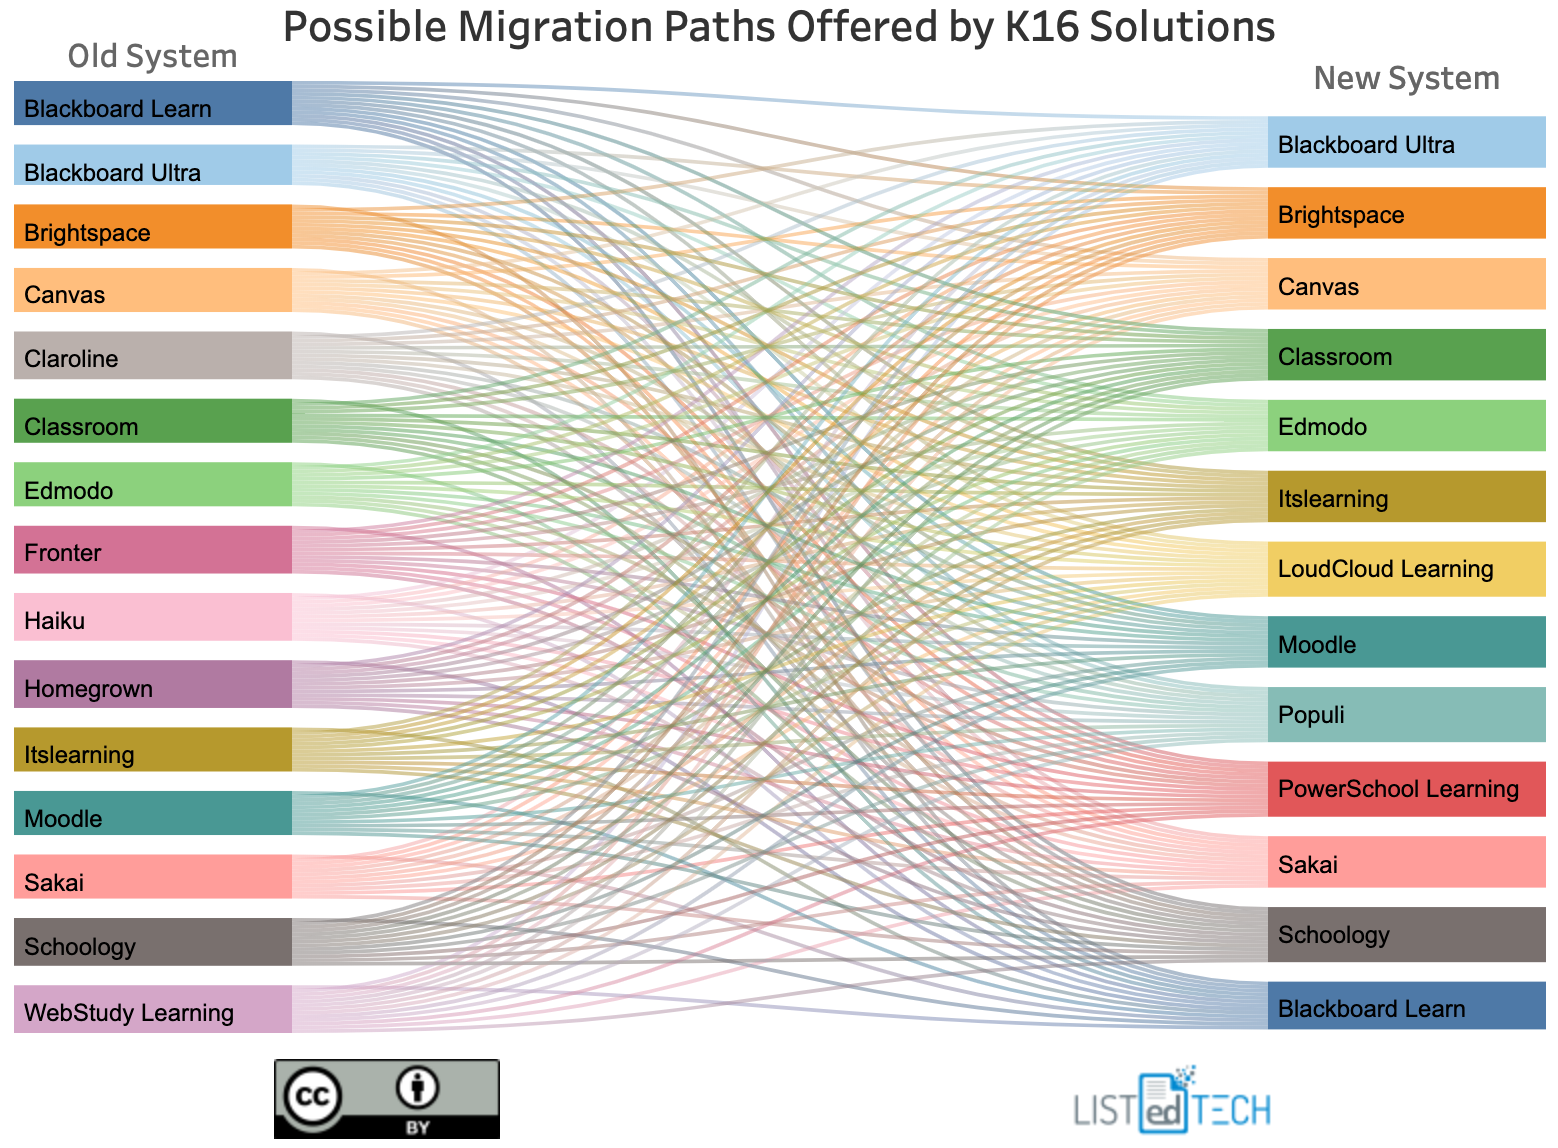 Possible Migration Paths Offered by K16 Solutions - LisTedTECH